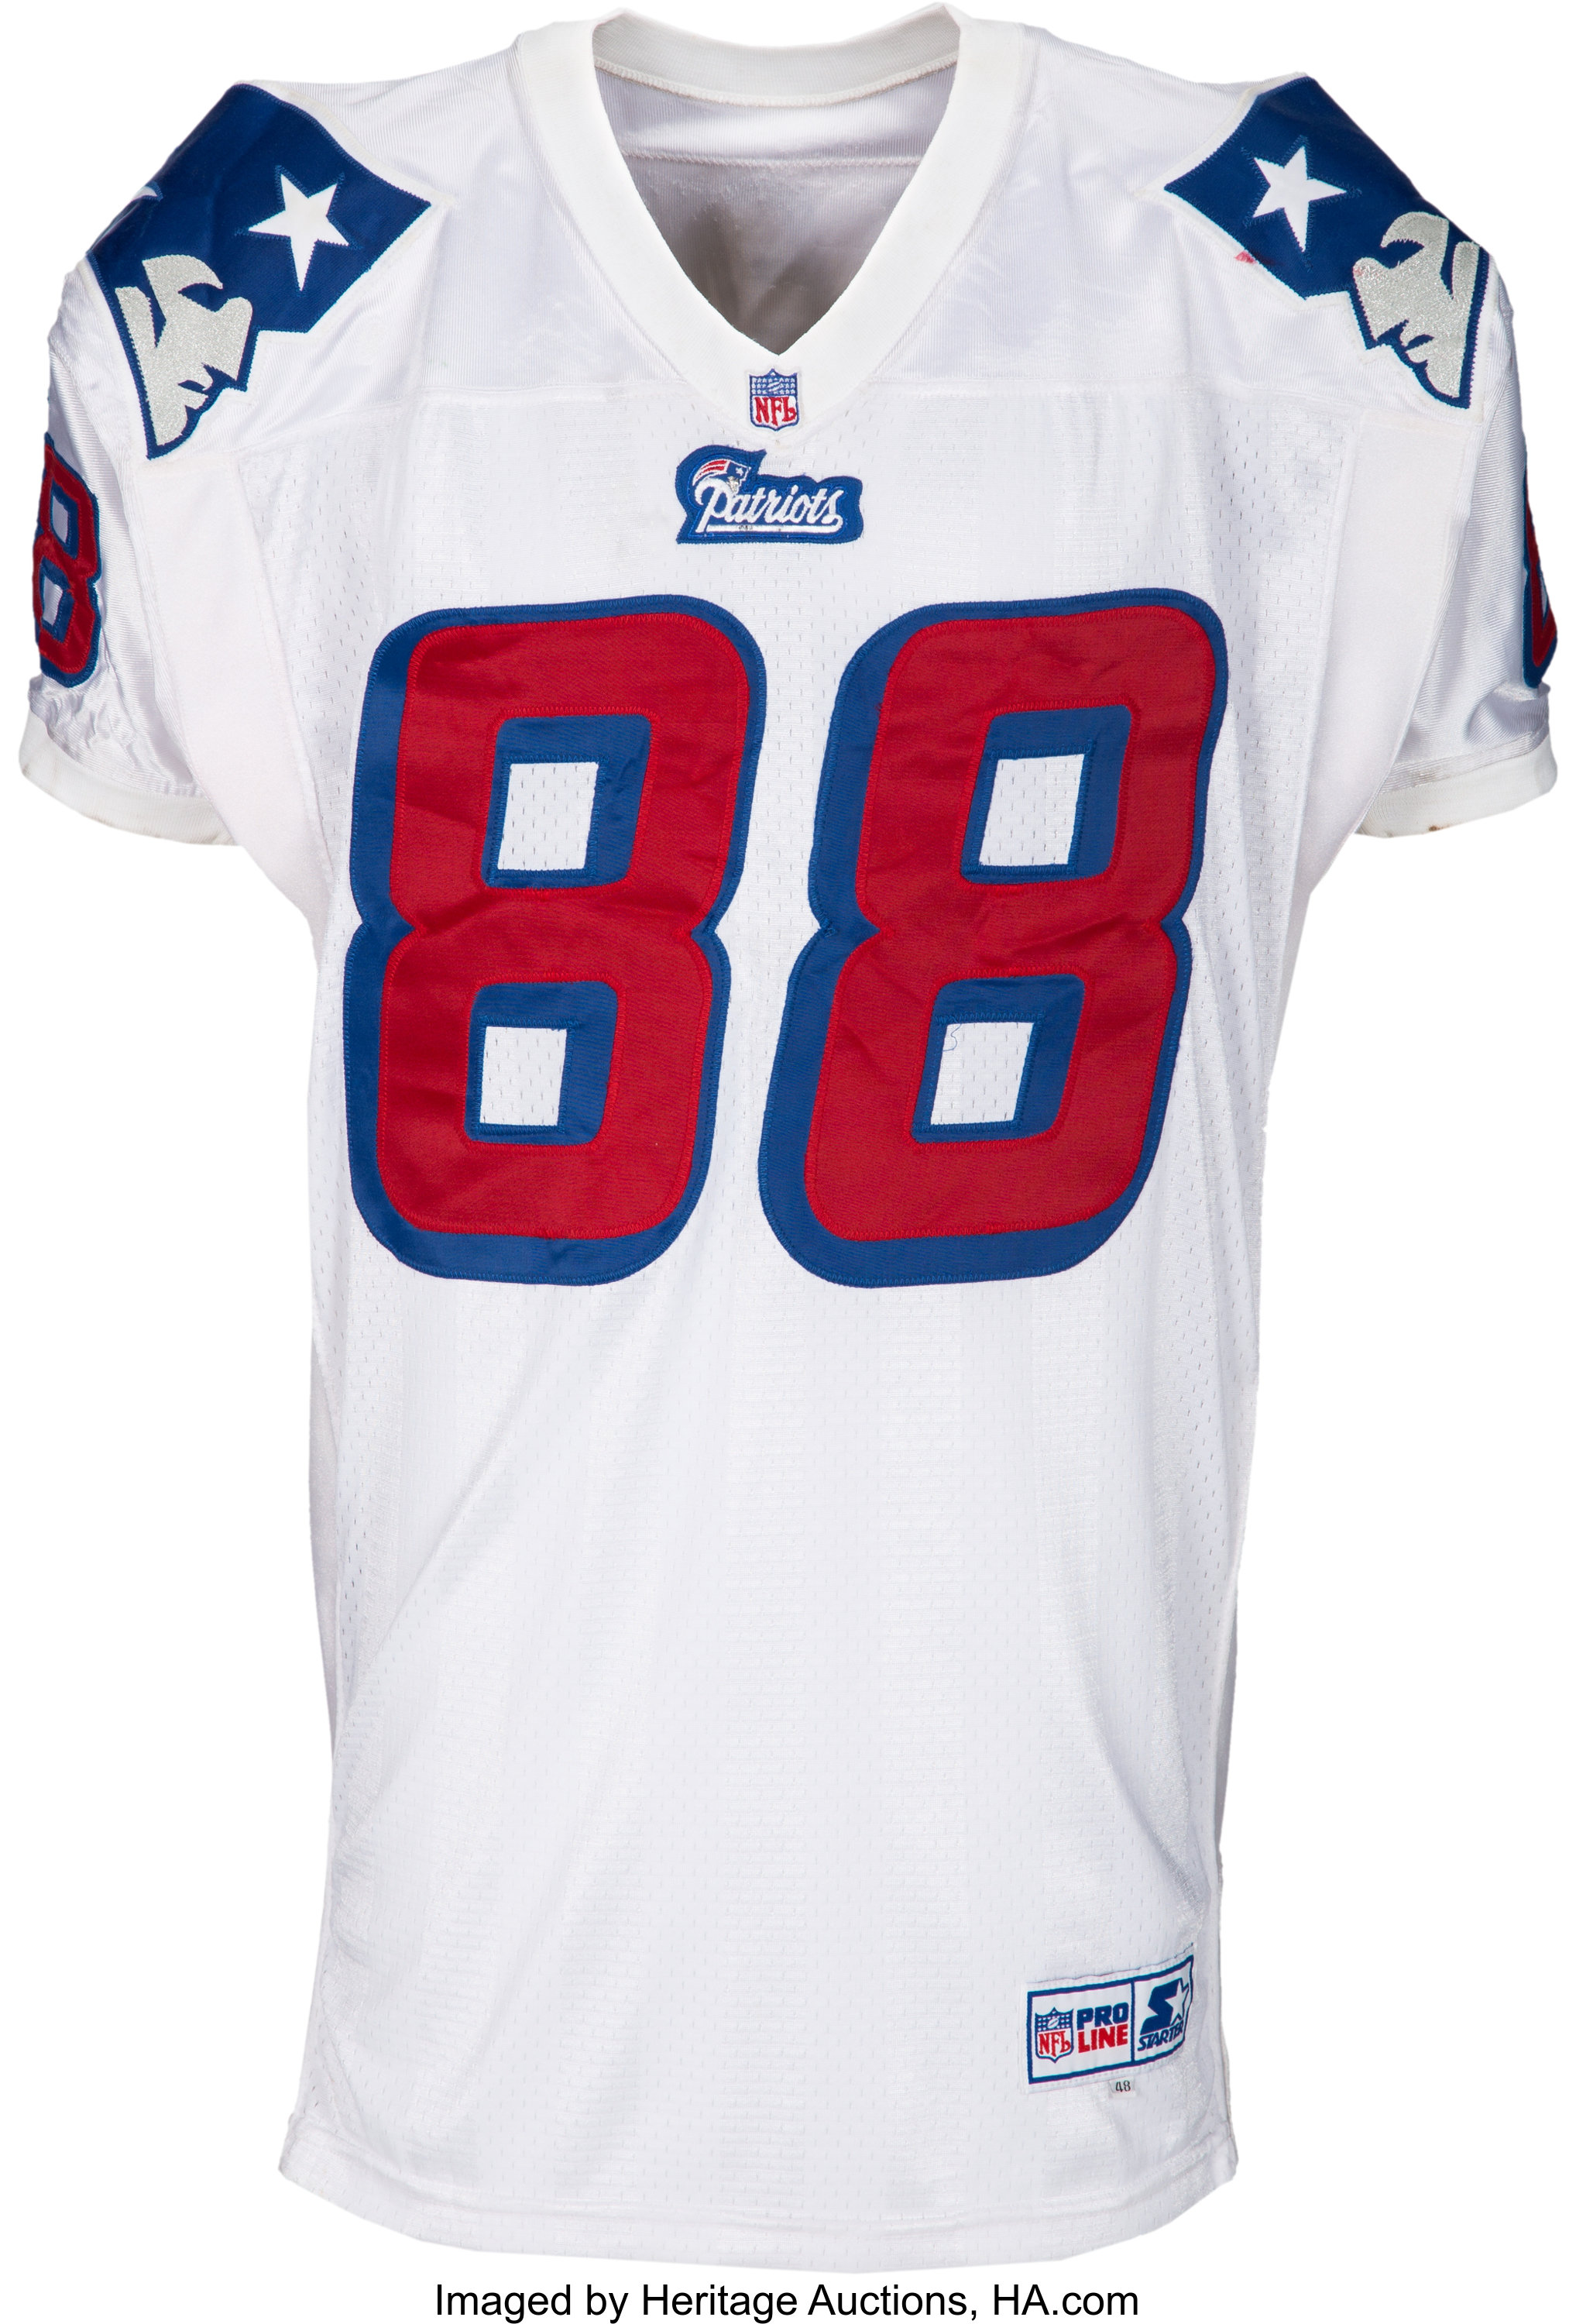 99.new England Patriots Game Worn Jersey Hotsell -  1694970875